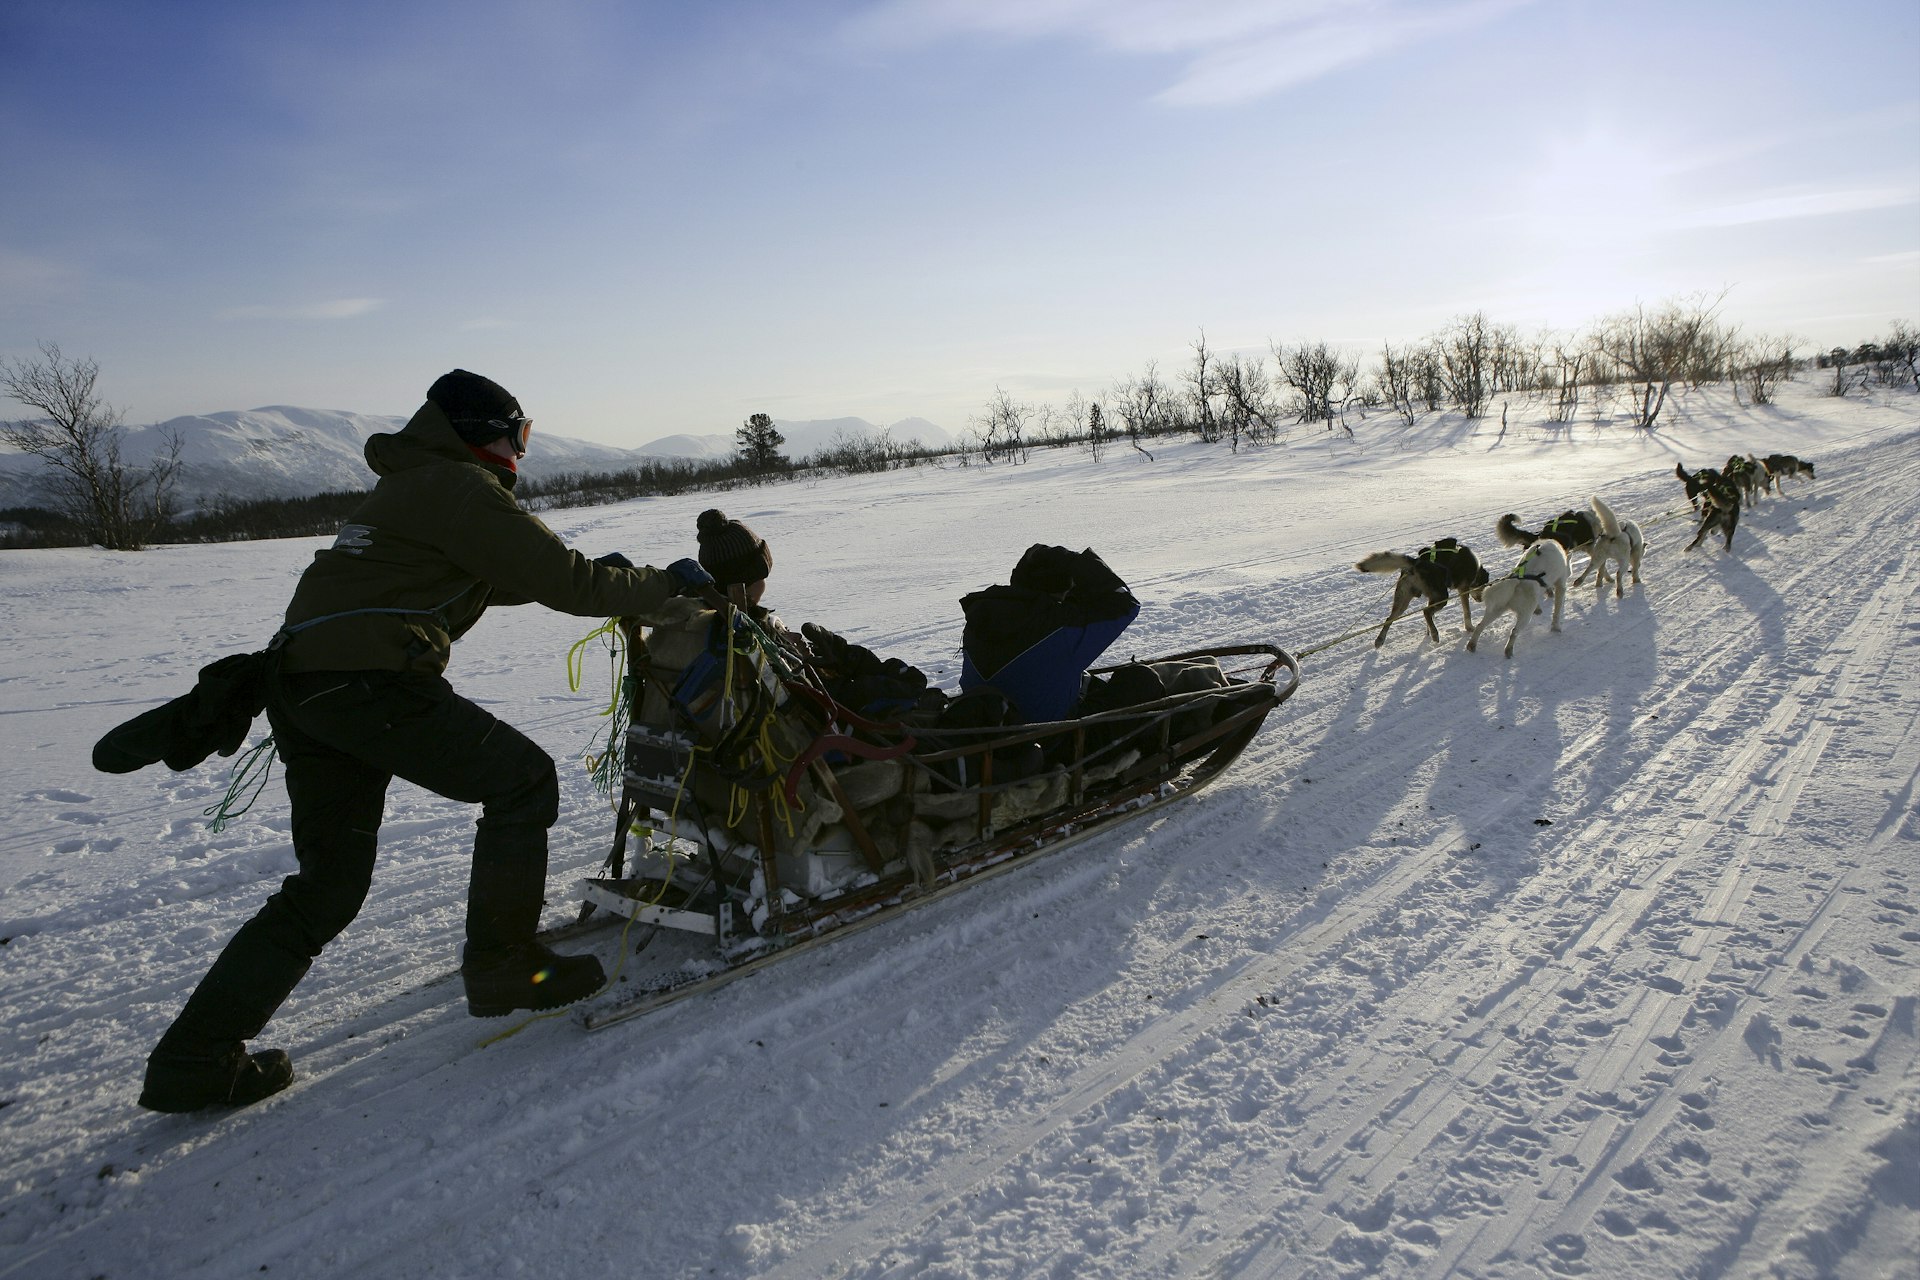 A musher pushes off with a dog team in Villmarkssenter, Norway 